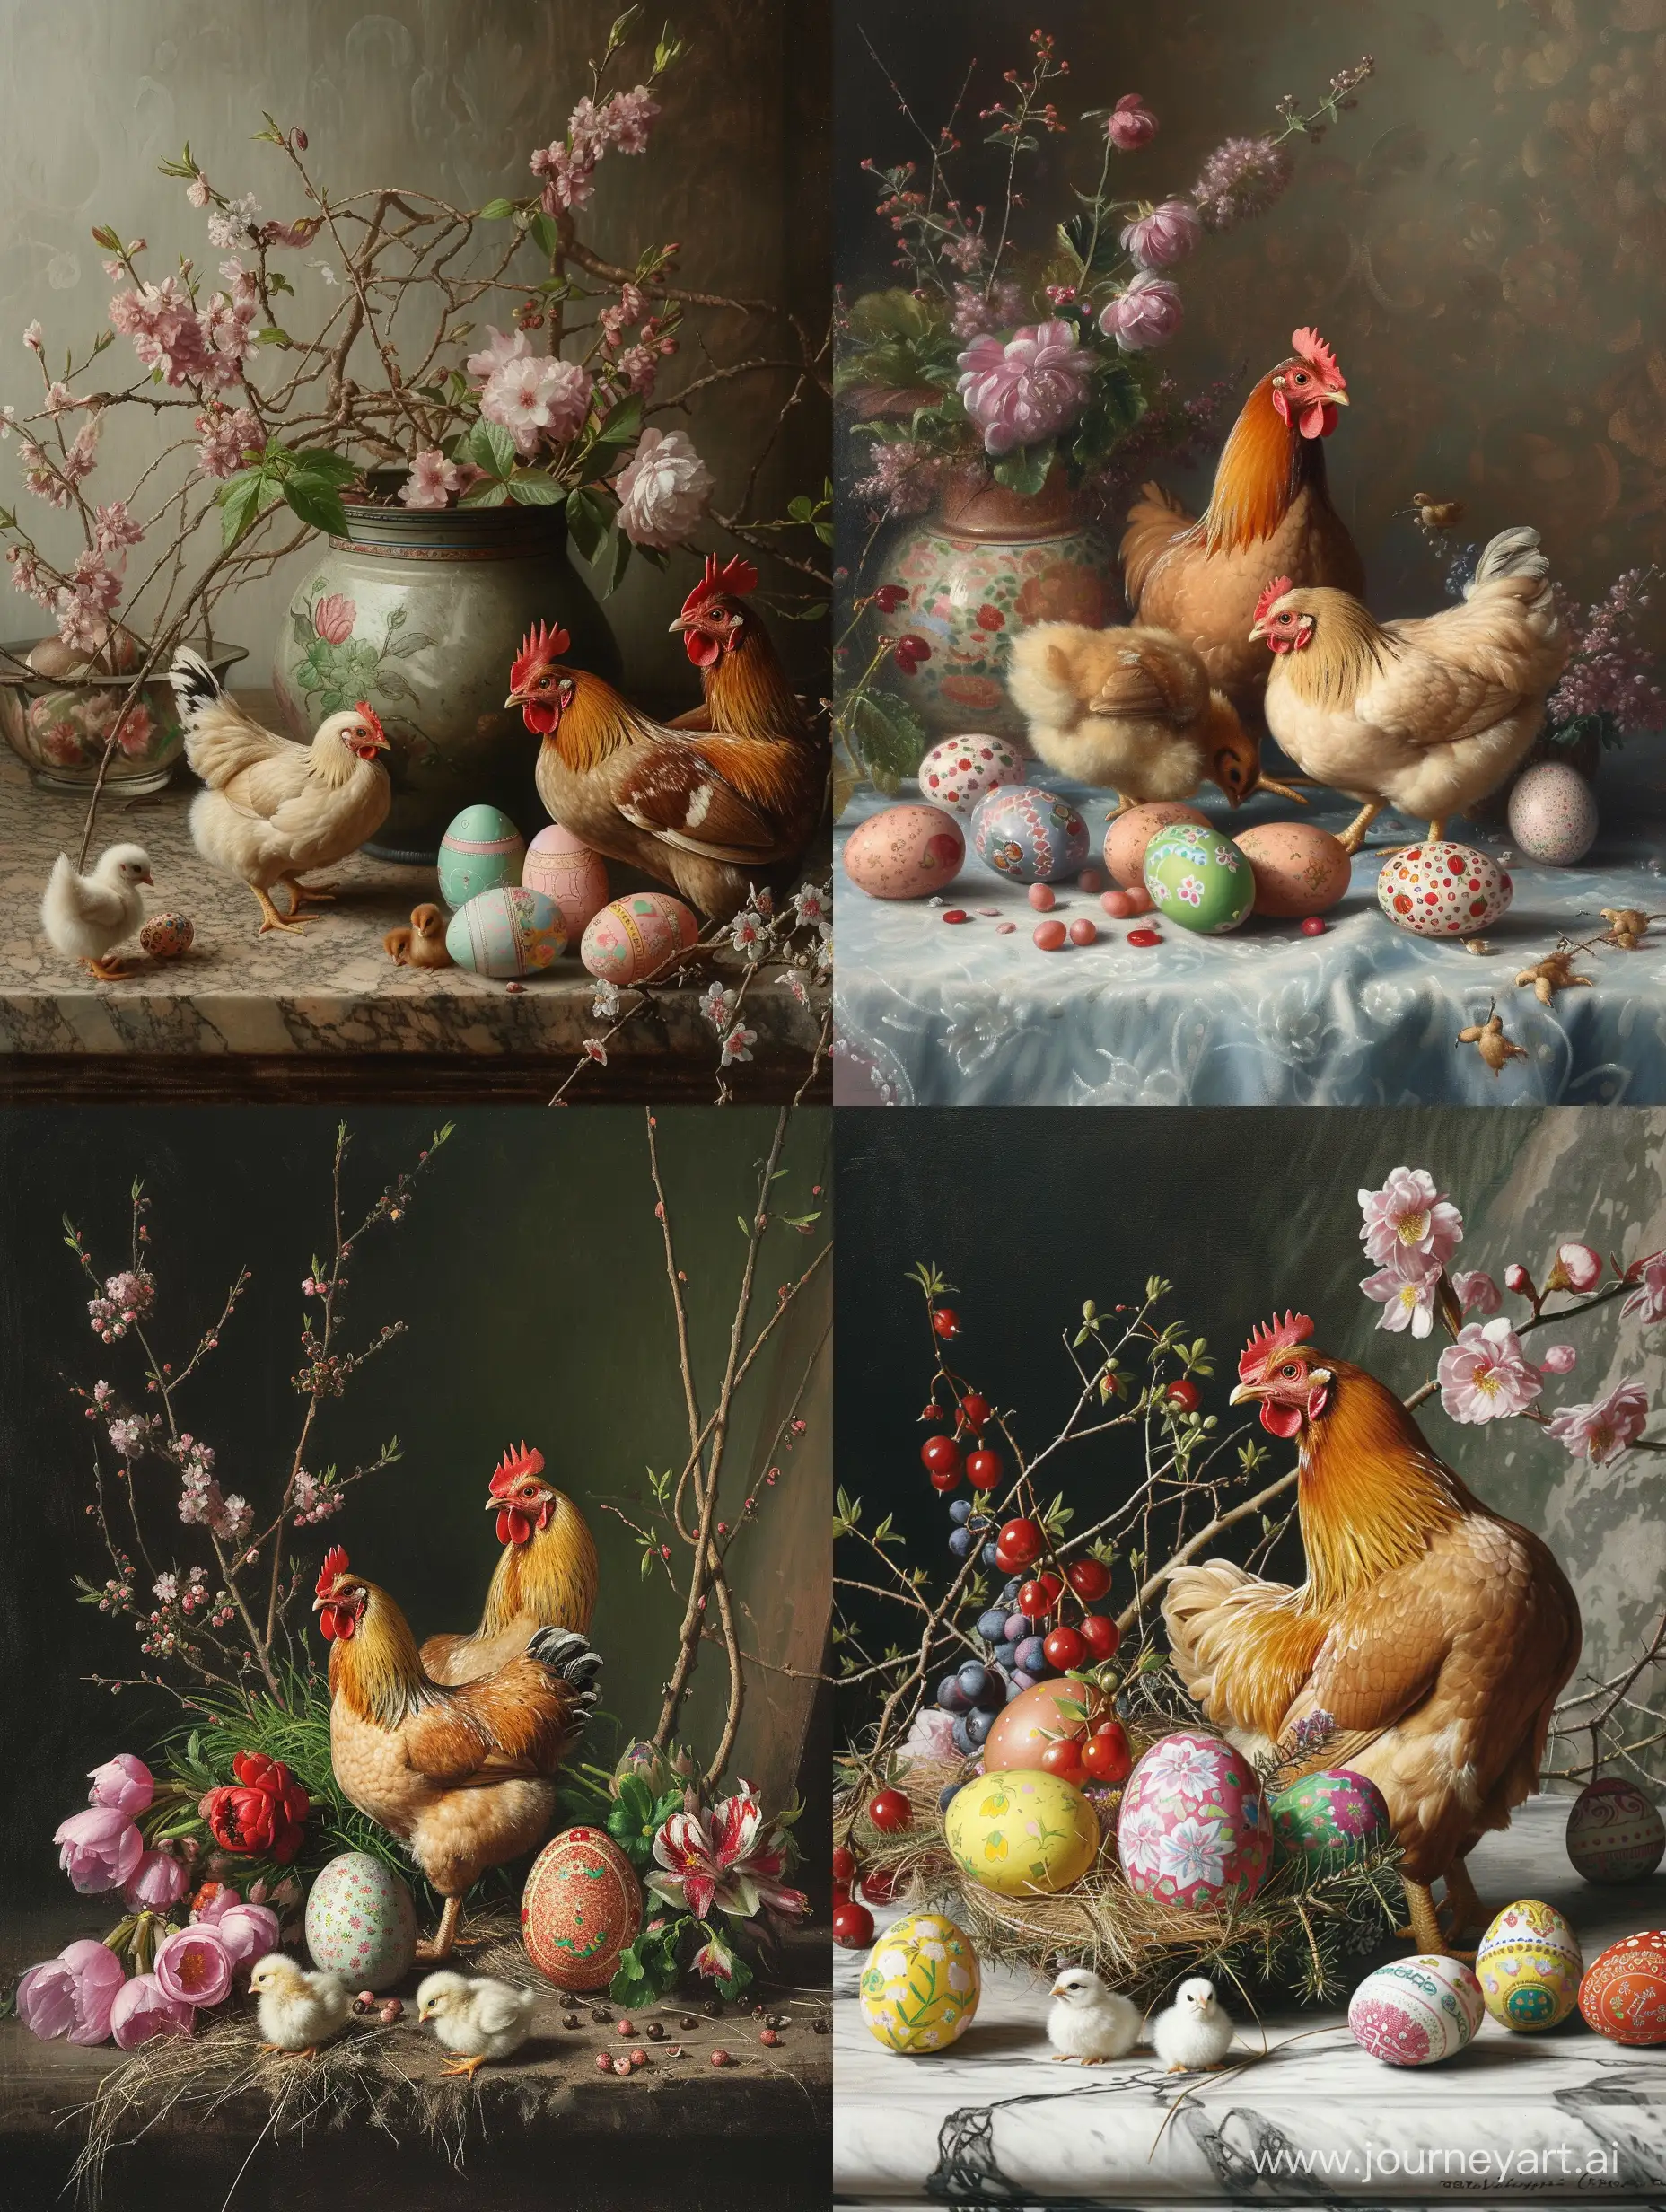 Rustic-Easter-Still-Life-Chicken-Chicks-and-Easter-Eggs-in-19th-Century-Russian-Art-Style